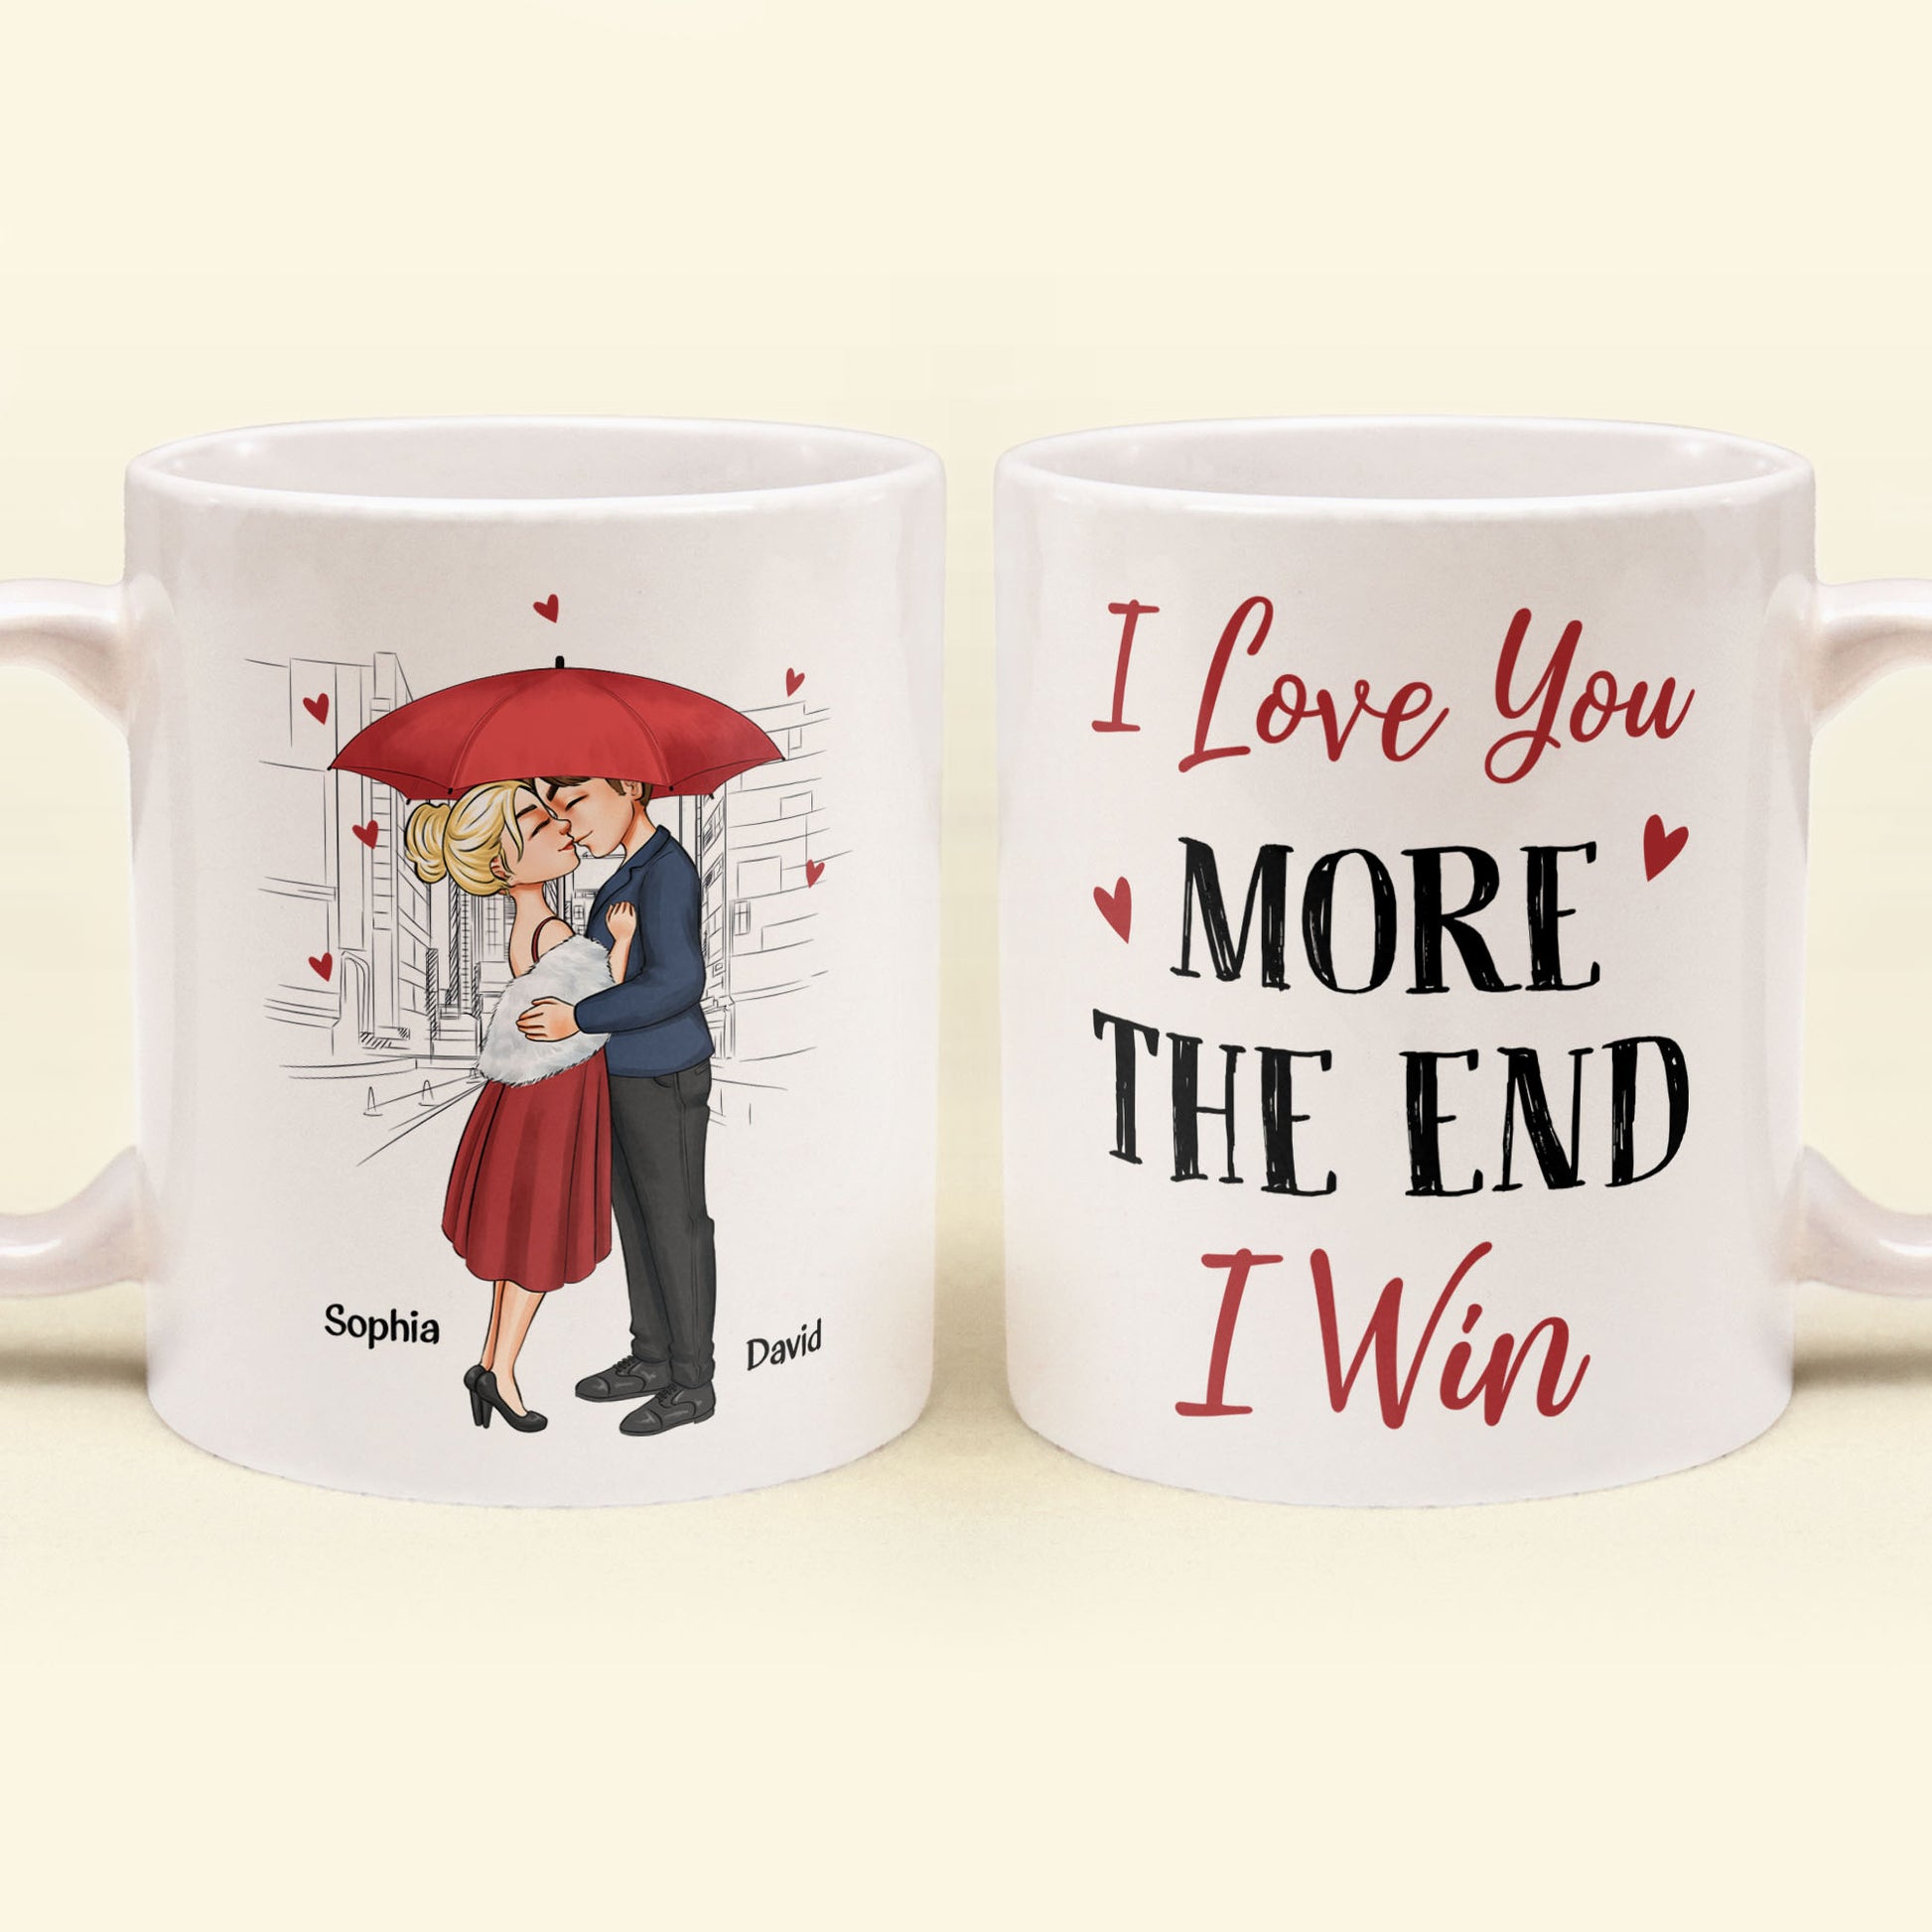 Coffee mug with love message: For another 366 days with you